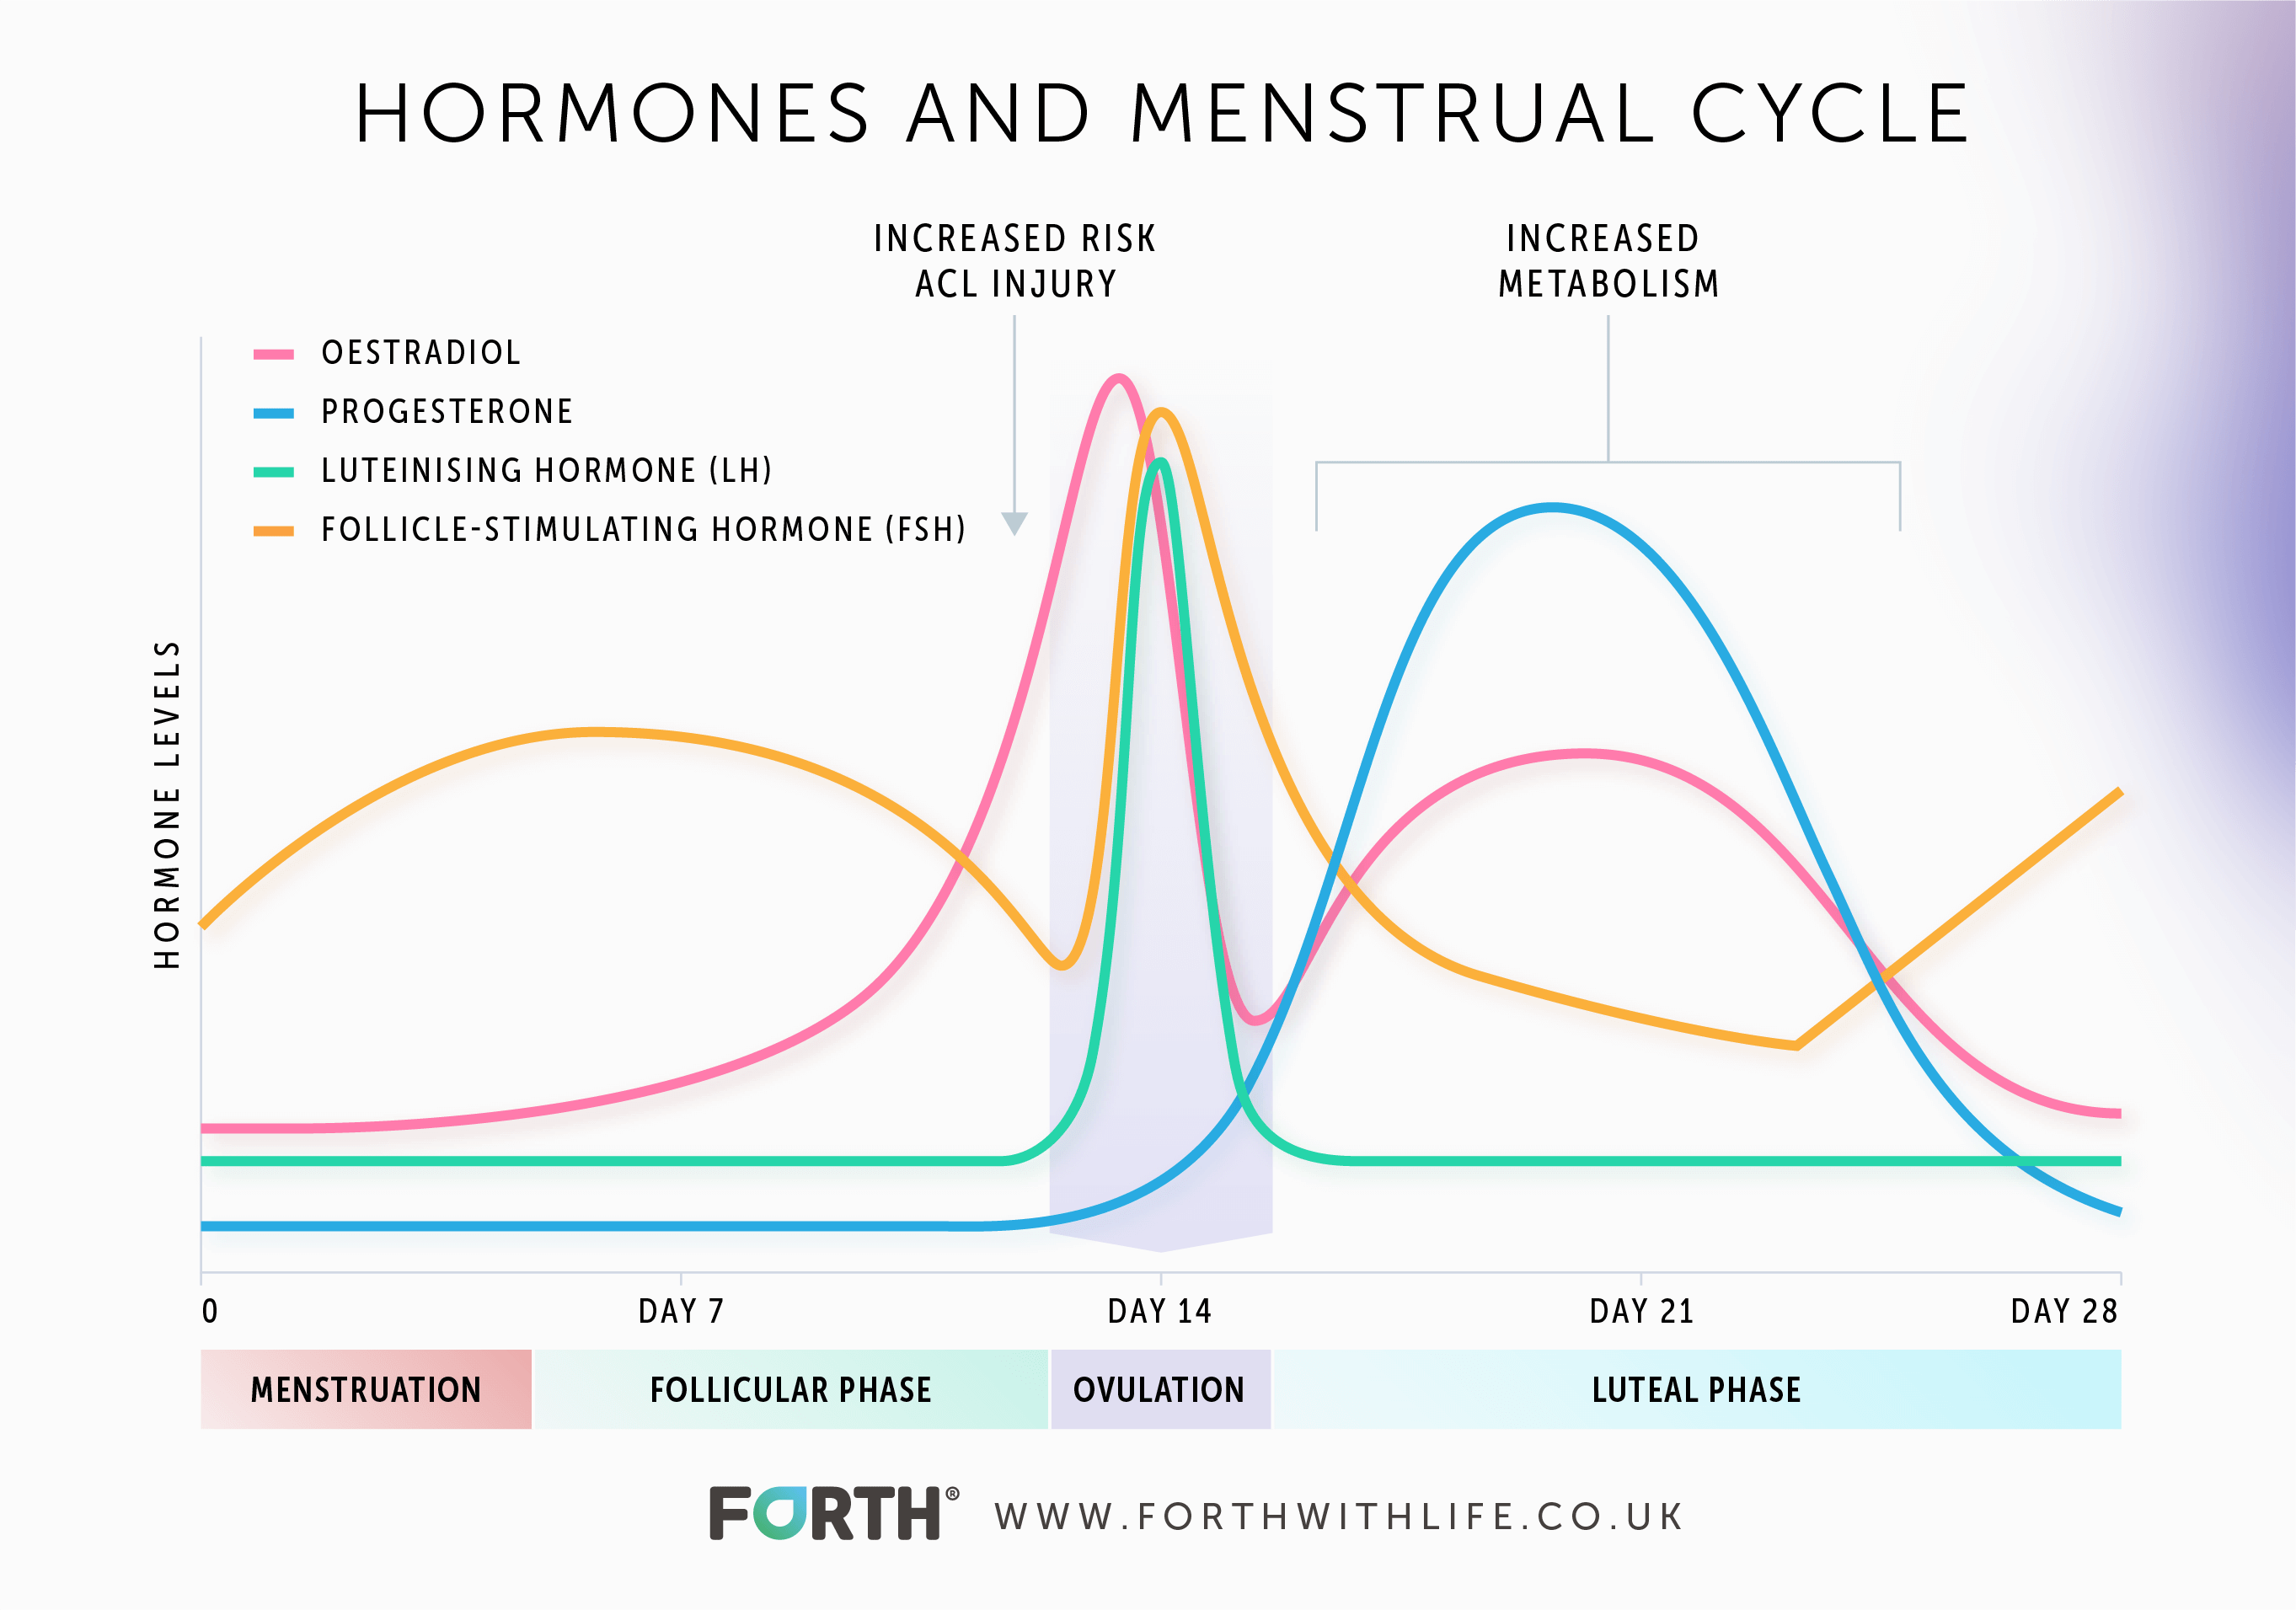 What Are The Normal Progesterone Levels In Women?